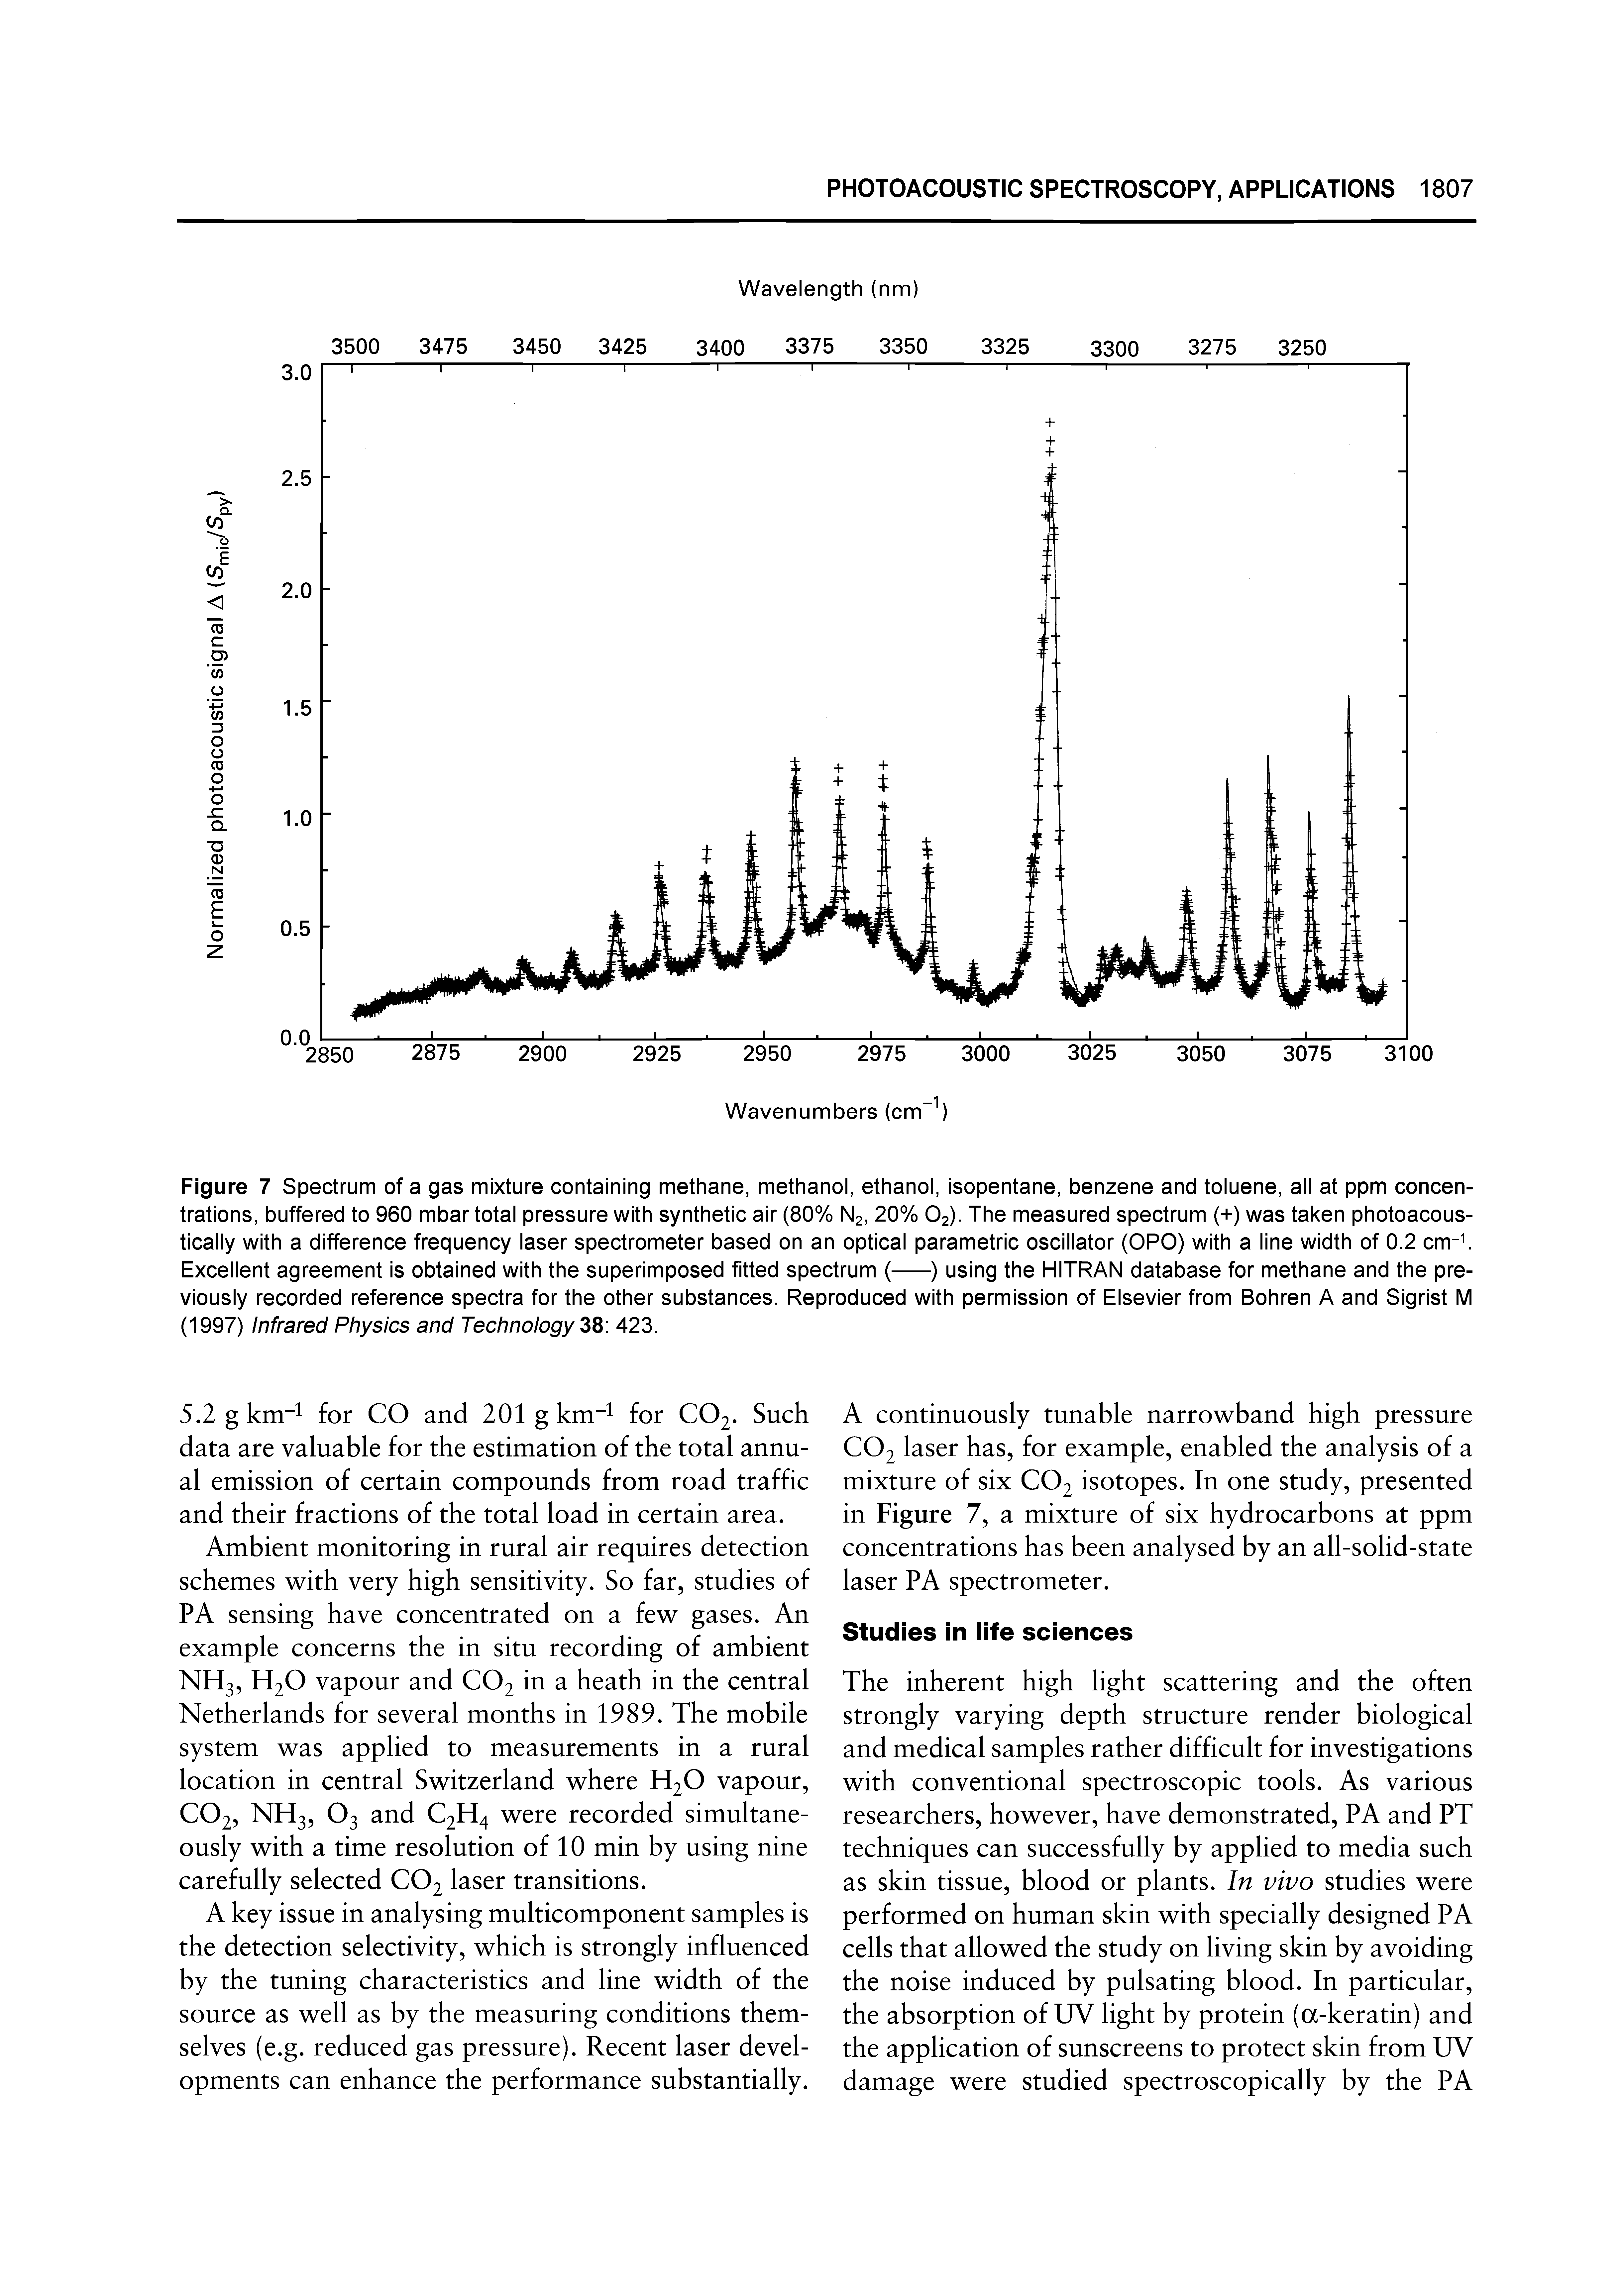 Figure 7 Spectrum of a gas mixture containing methane, methanol, ethanol, isopentane, benzene and toluene, all at ppm concentrations, buffered to 960 mbar total pressure with synthetic air (80% N2, 20% O2). The measured spectrum (+) was taken photoacous-tically with a difference frequency laser spectrometer based on an optical parametric oscillator (OPO) with a line width of 0.2 cm- Excellent agreement is obtained with the superimposed fitted spectrum (-) using the HITRAN database for methane and the pre-...